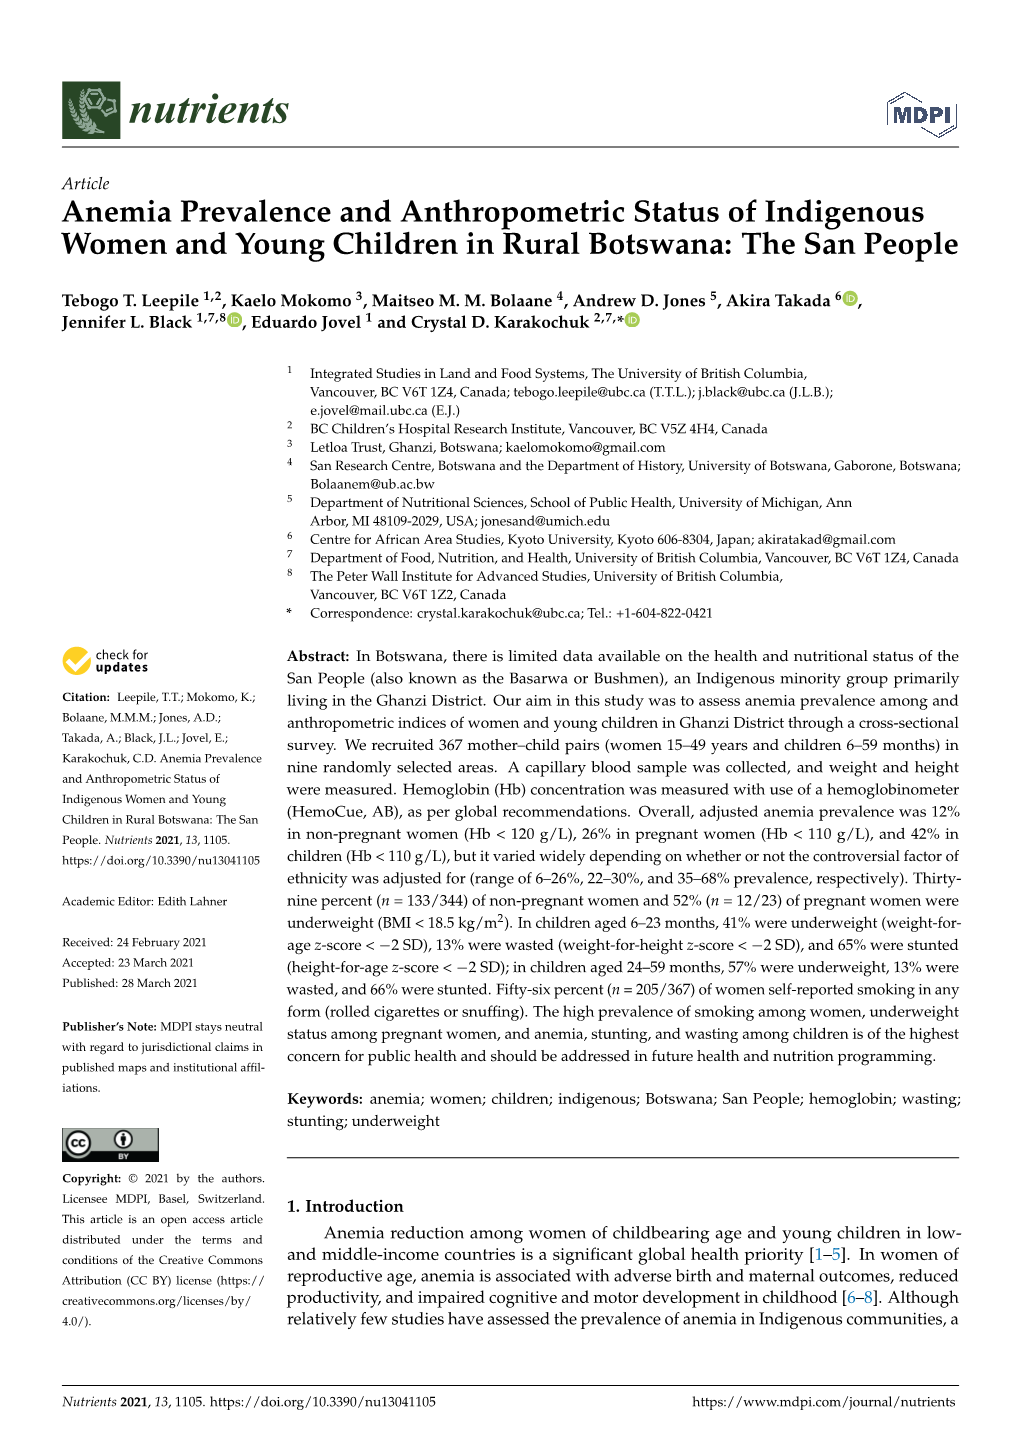 Anemia Prevalence and Anthropometric Status of Indigenous Women and Young Children in Rural Botswana: the San People